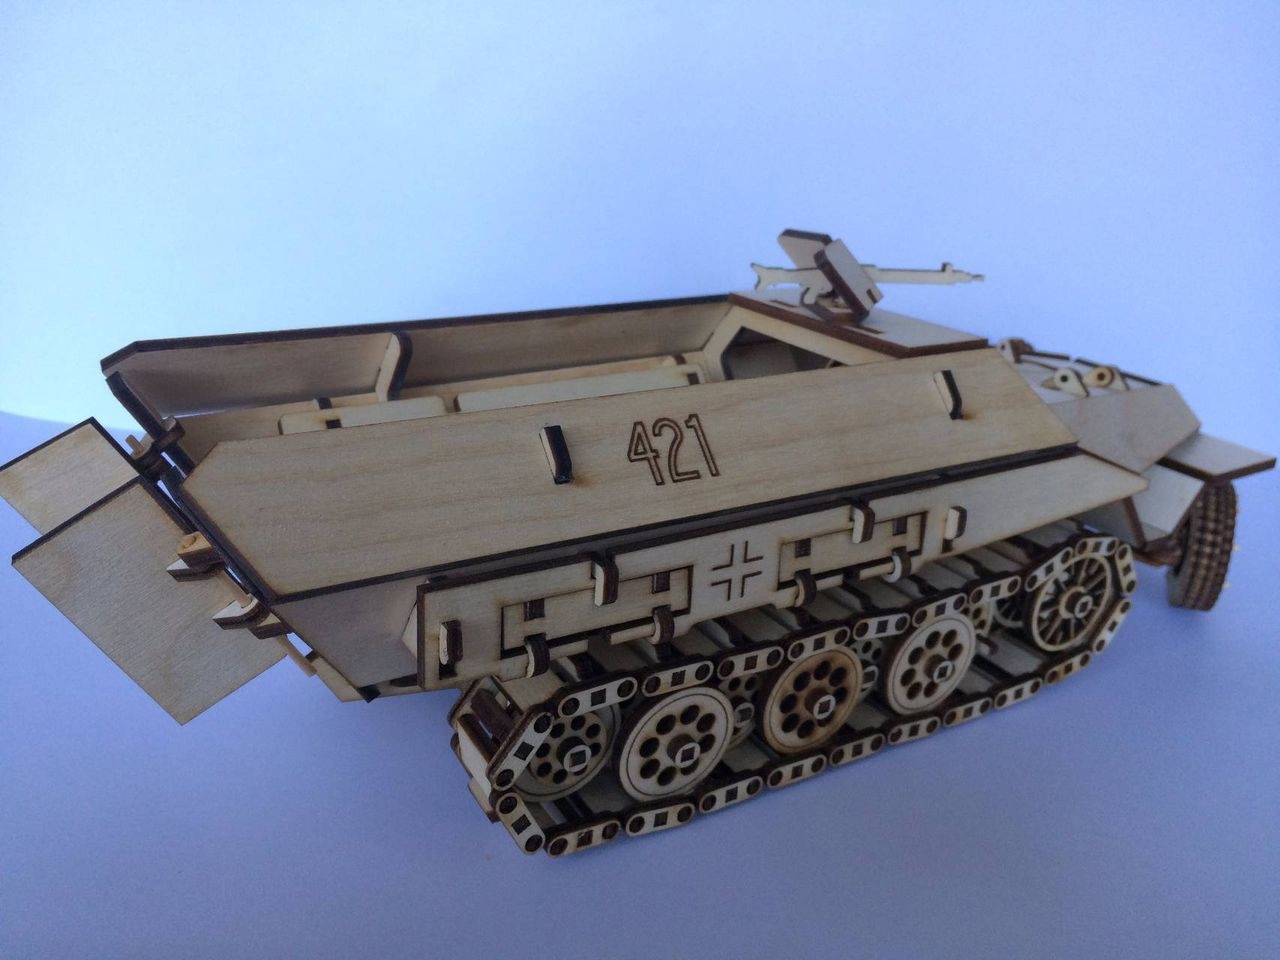 Laser Cut Armored Personnel Carrier APC 3D Model Wooden Toy Free Vector